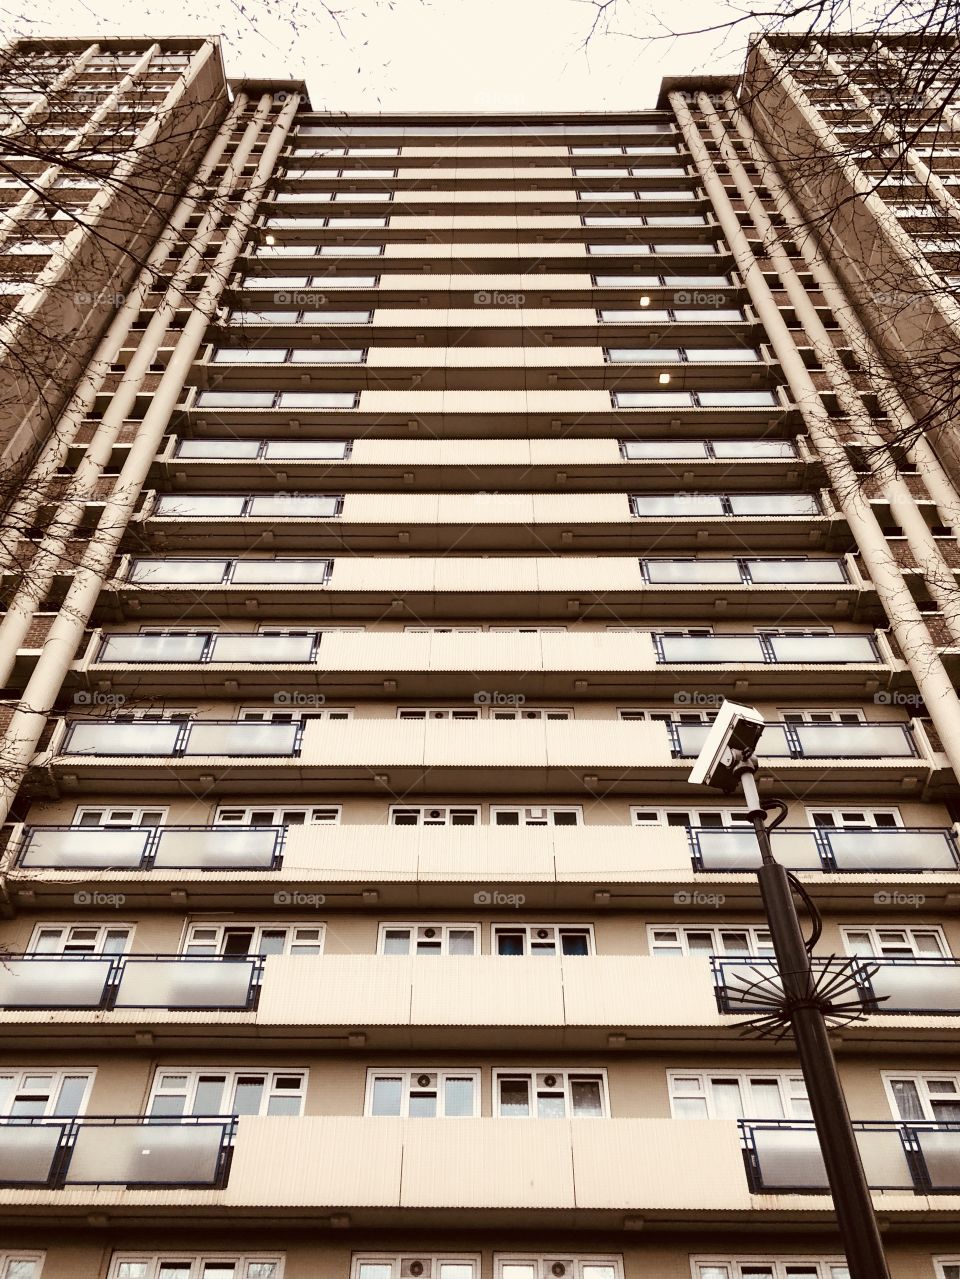 London inner city tower block exterior with symmetrical features and cctv security camera. Framed by bare winter tree branches with grey sky visible